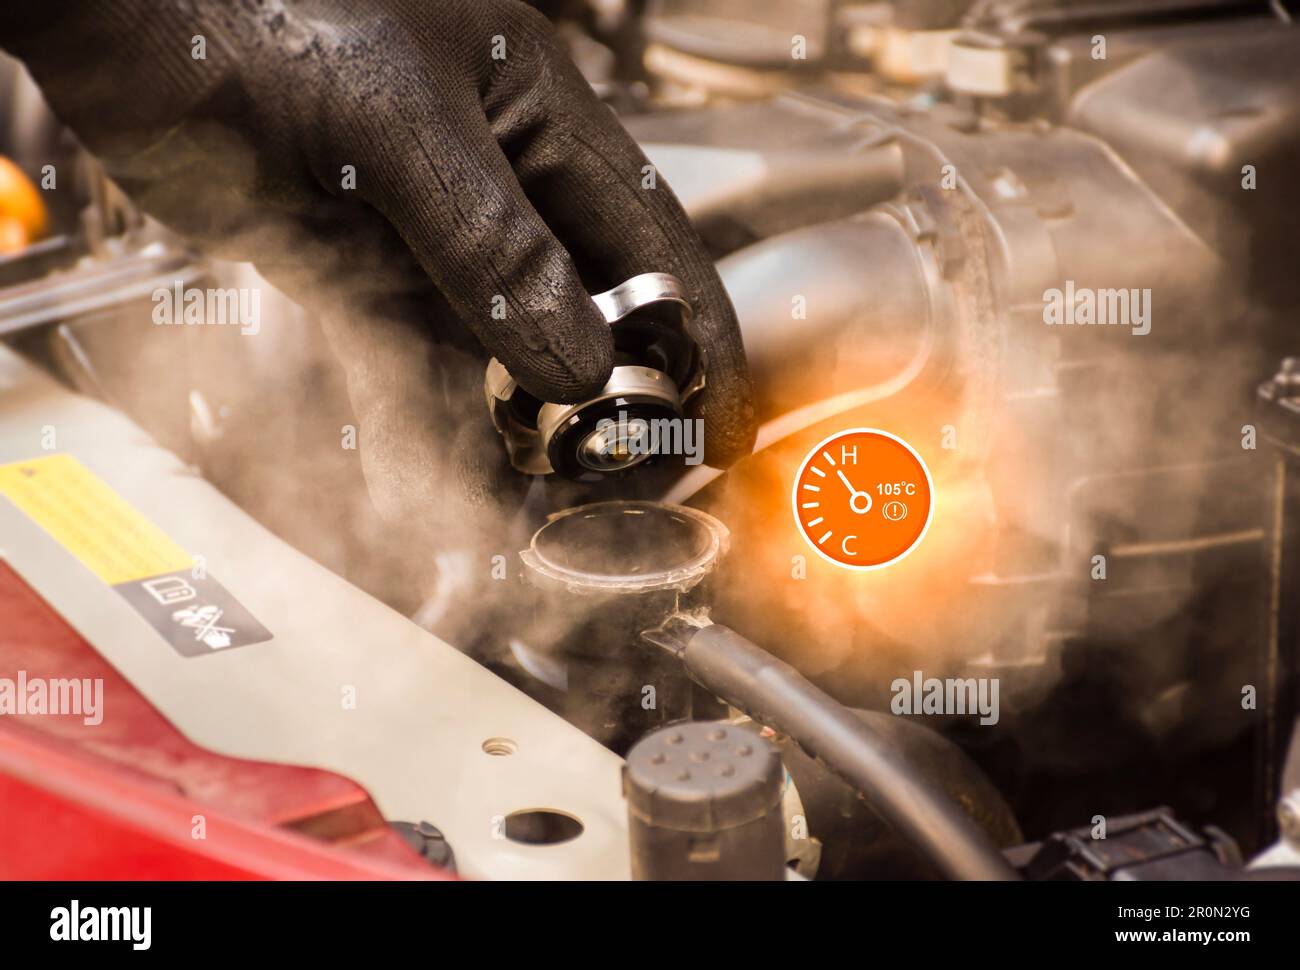 Auto mechanic hand opens the radiator cap with steam escaping around the engine compartment from the high heat,water temp gauge symbol with high tempe Stock Photo